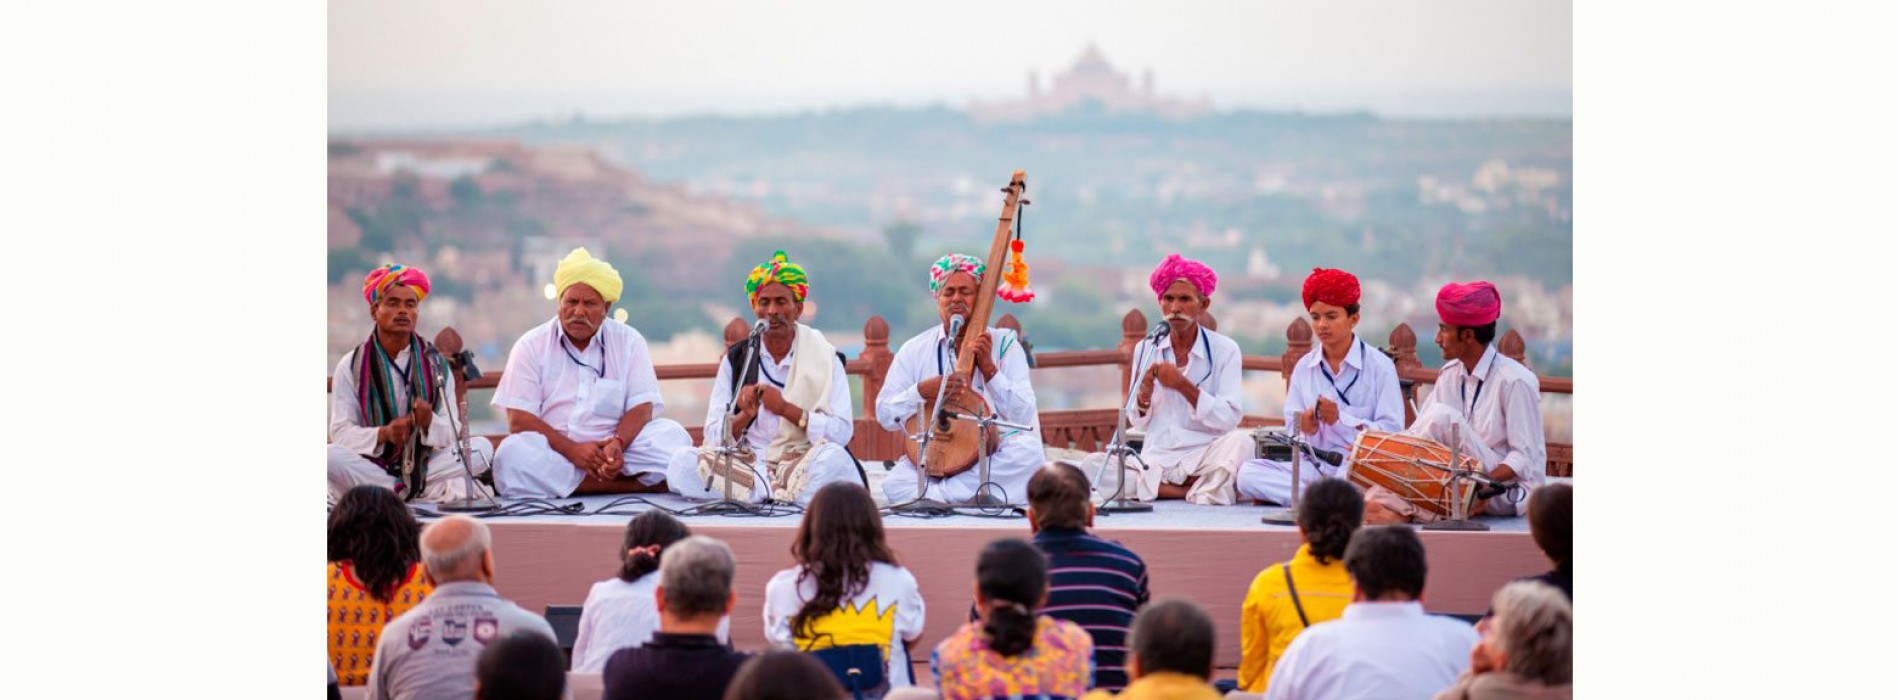 Taj invites you to soak up the musical roots of Rajasthan